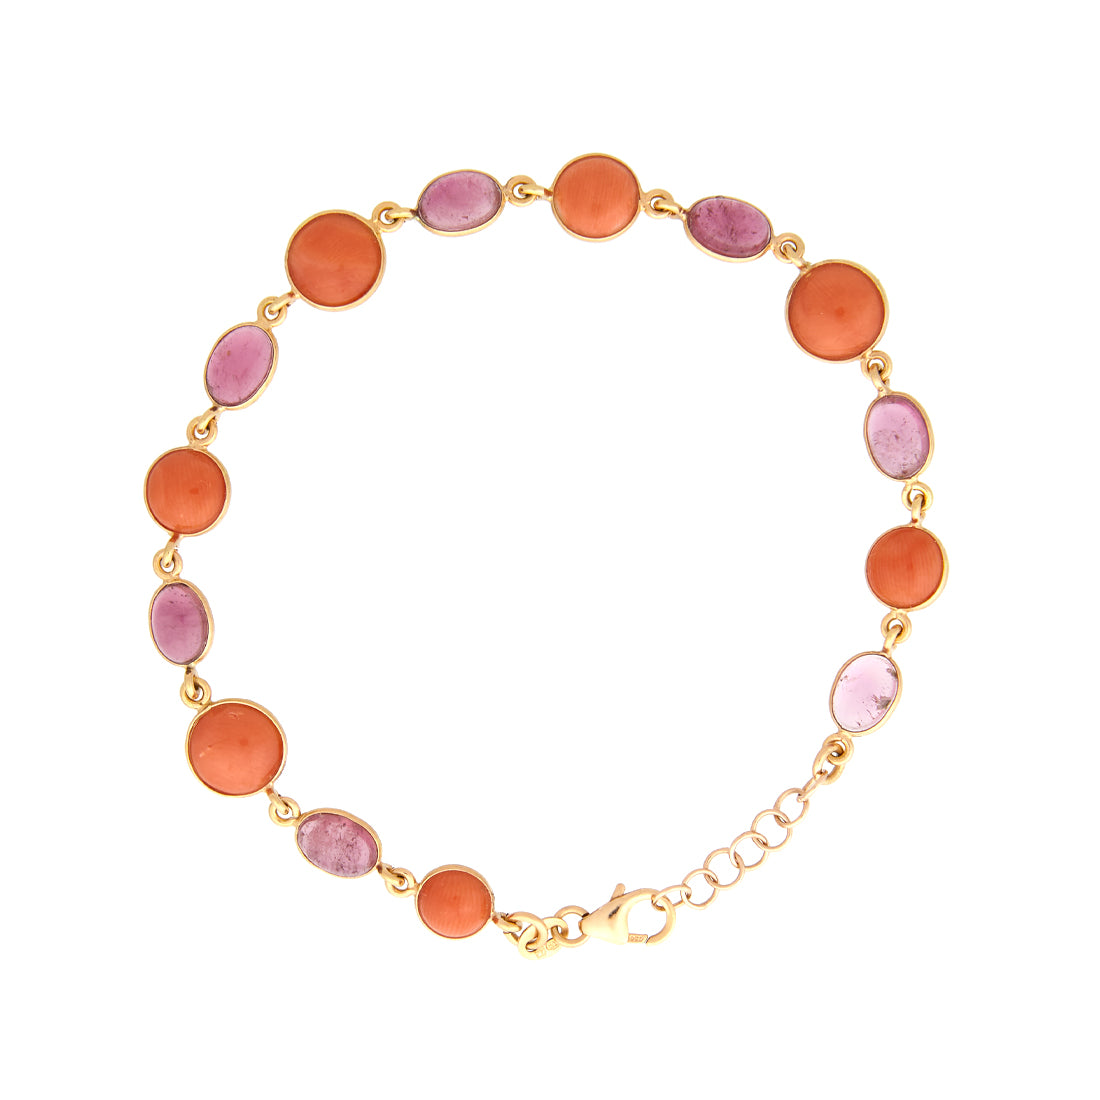 Rose gold bracelet with tourmaline and coral